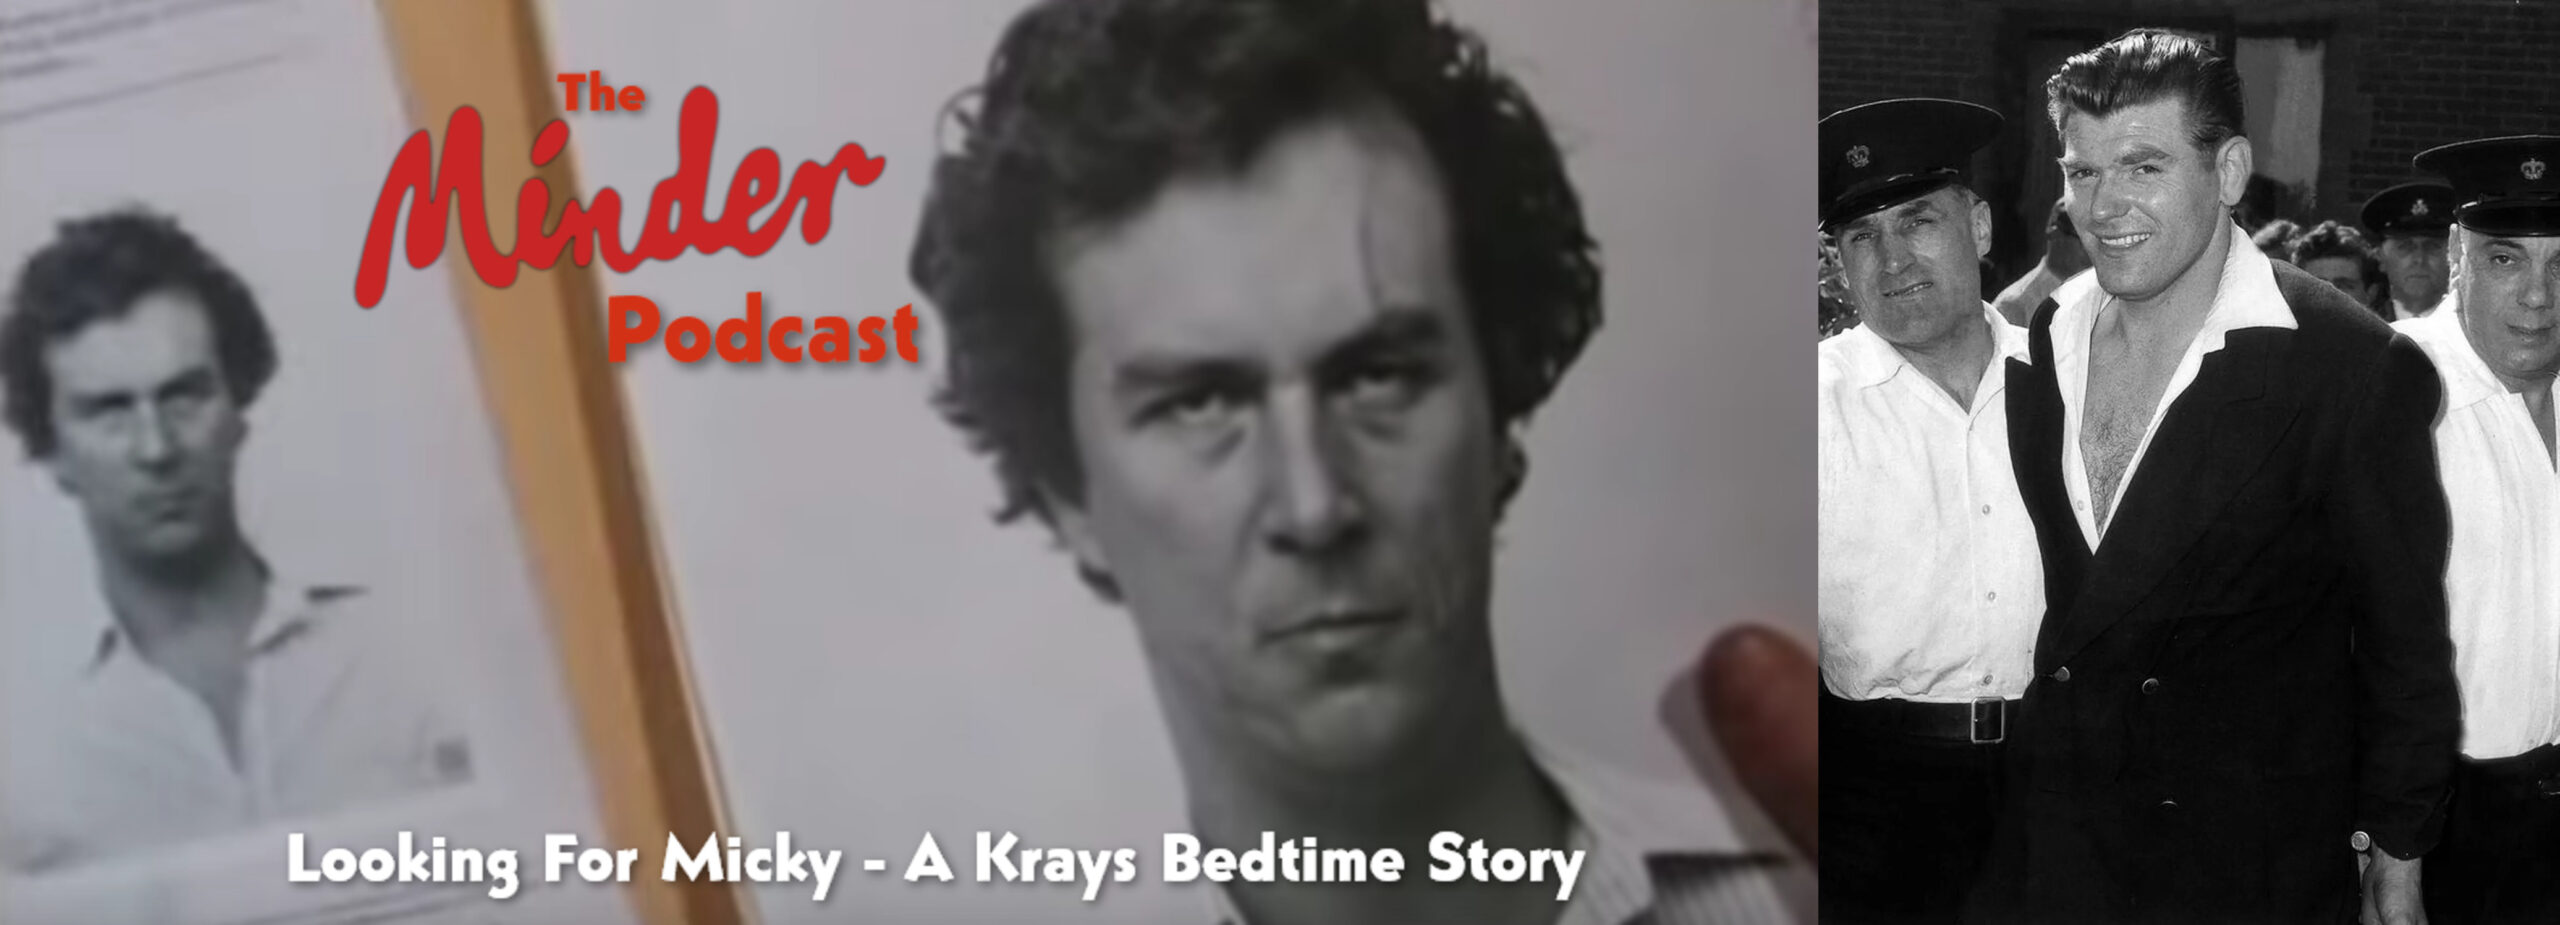 Episode 27 – Looking For Micky (A Krays Bedtime Story)